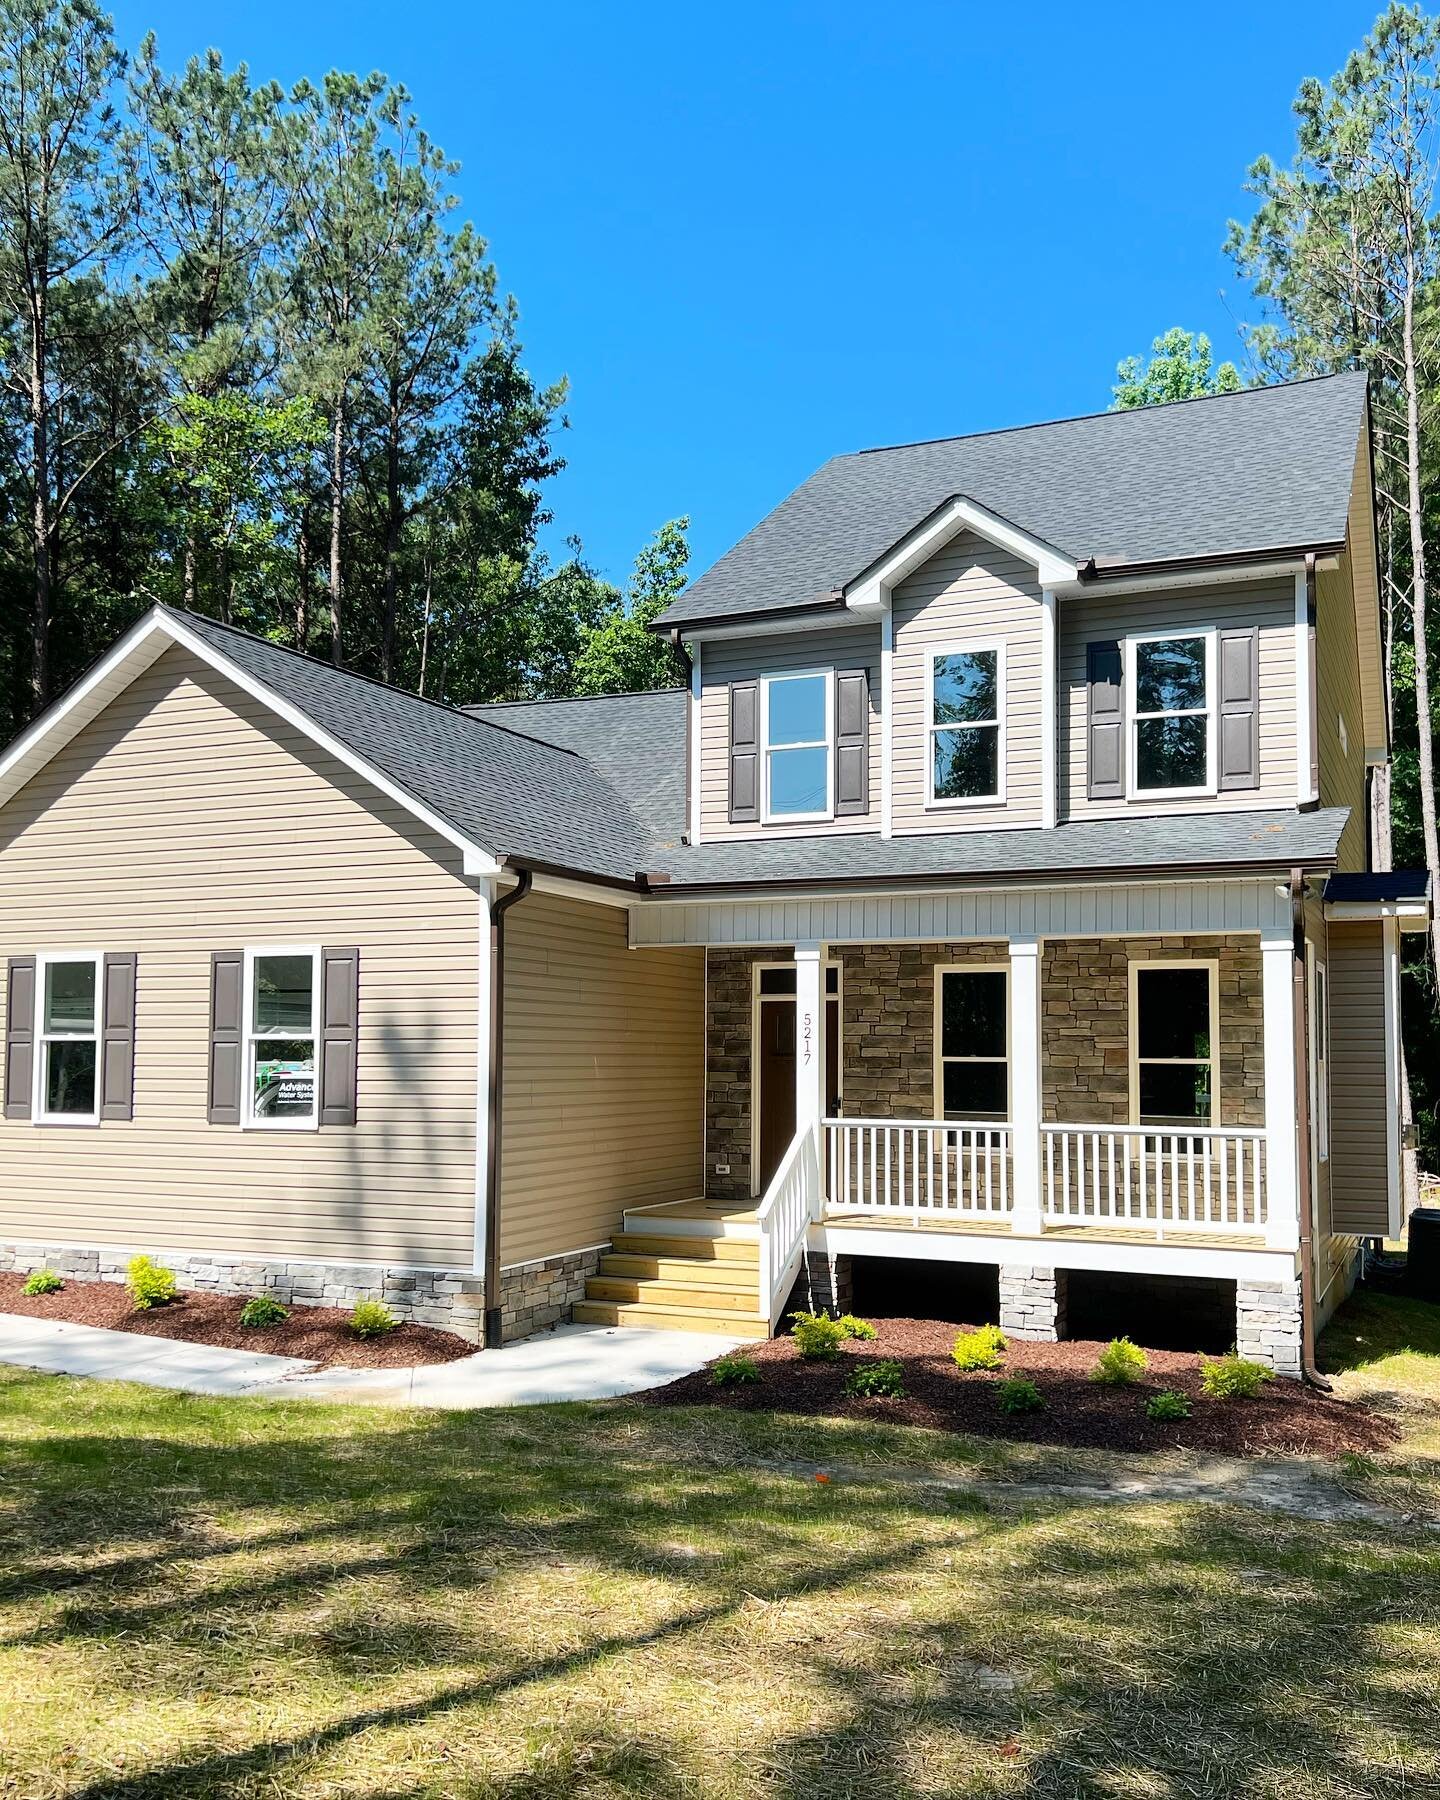 Closed!! 🏡 🔑

Lot 8 at O&rsquo;Connell Farms in Zebulon is ready for move in day!! 🤩

Follow us on Instagram ➡️ @oconnelldeveloping
www.oconnelldeveloping.com

#customhome #customhomes #homebuilder #custombuilder #customhomesnc #customhomedesign #